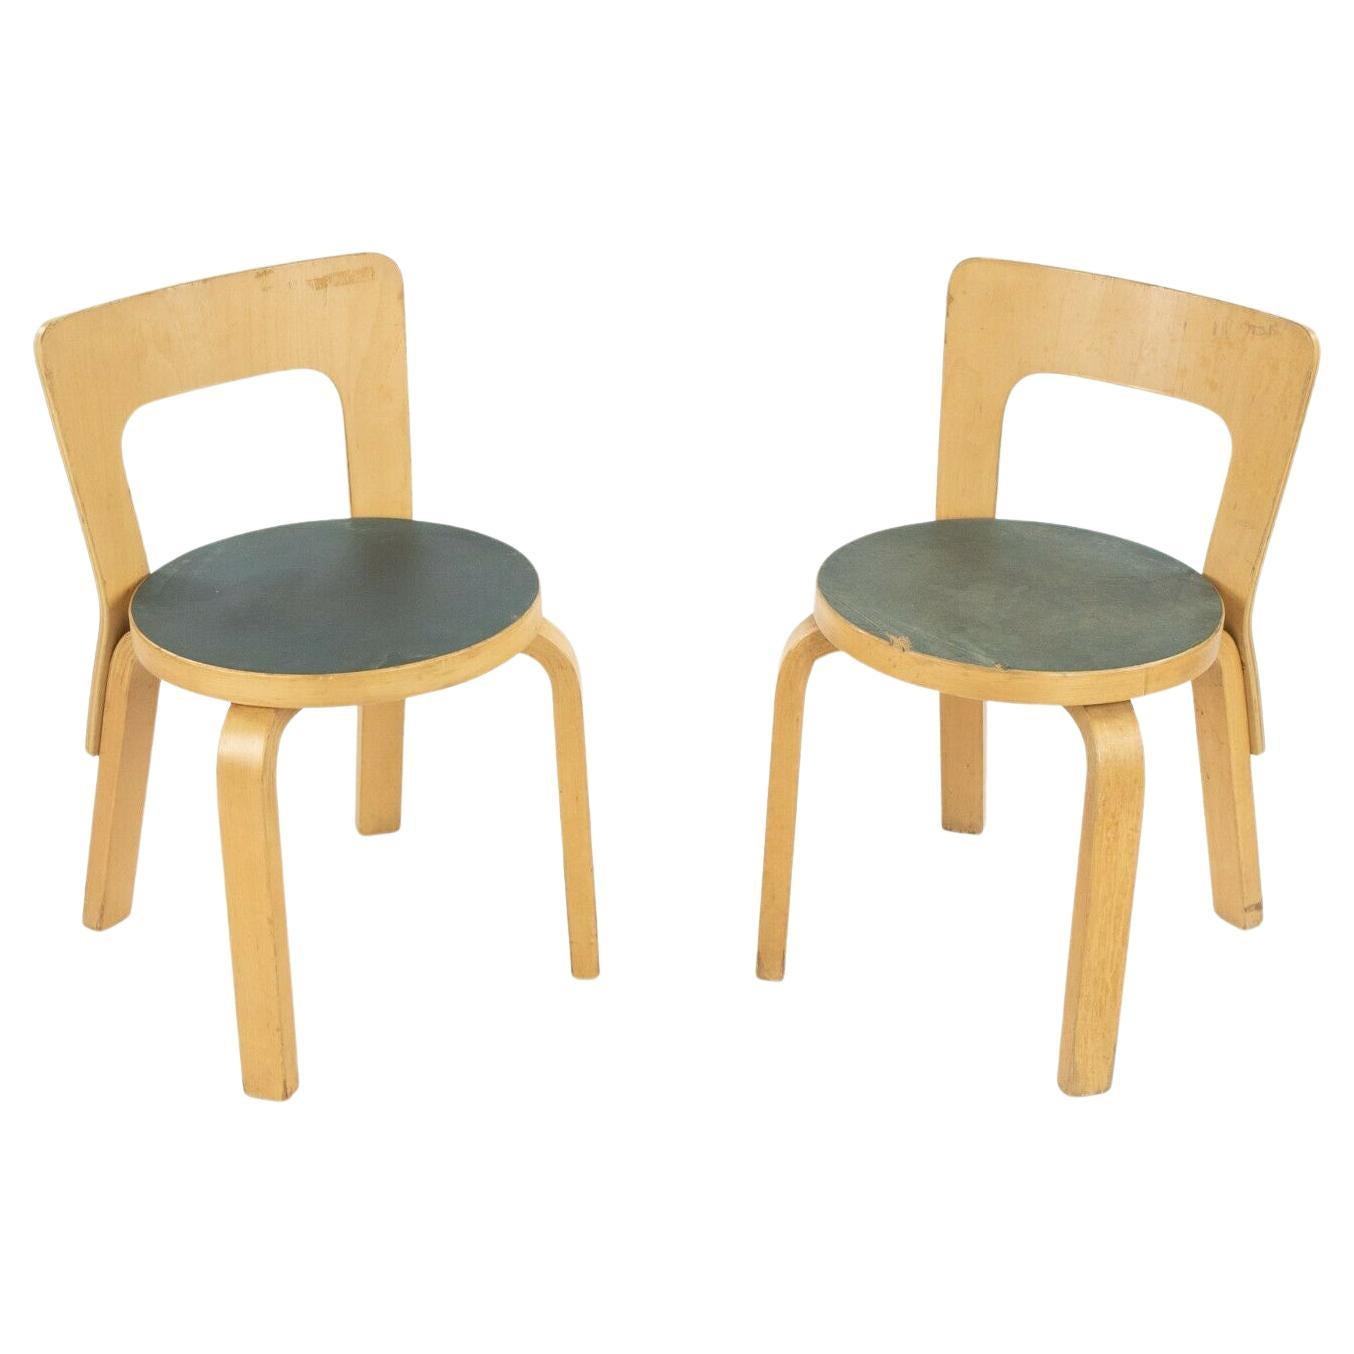 1950s Pair of Alvar & Aino Aalto N65 Childrens / Childs Chairs With Blue Seats For Sale